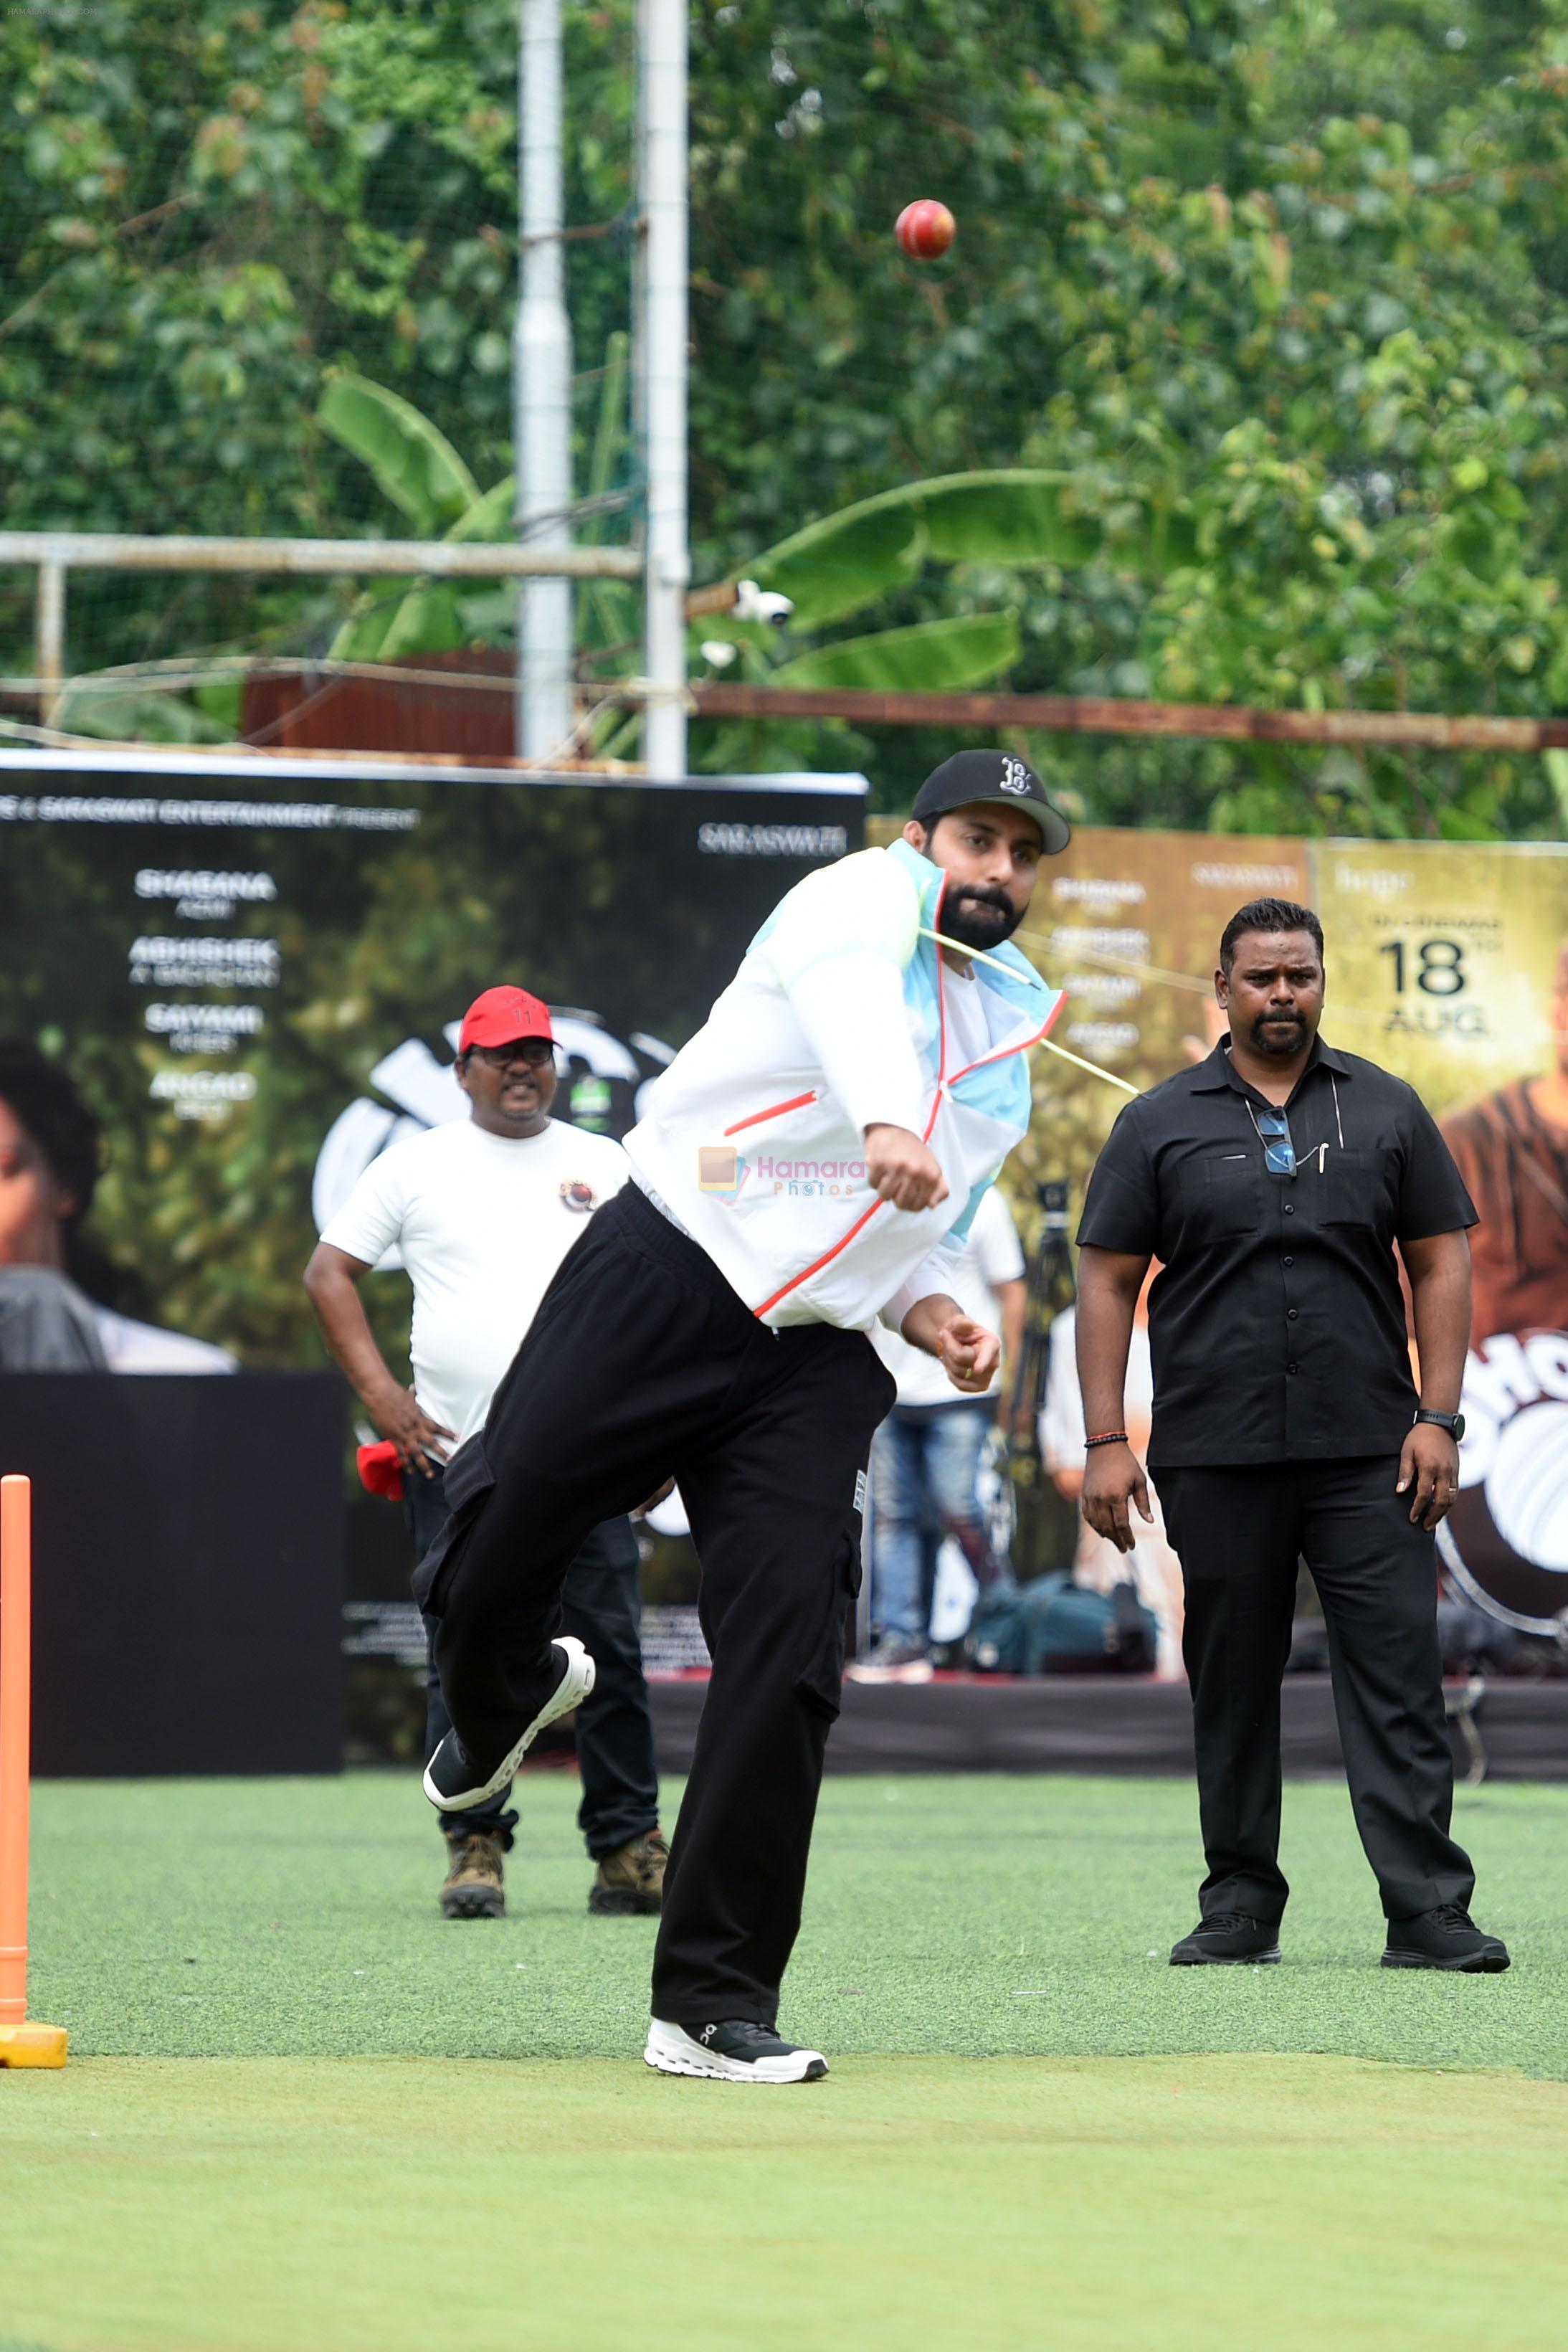 Abhishek Bachchan playing cricket match to promote the sports movie Ghoomer on 10th August 2023